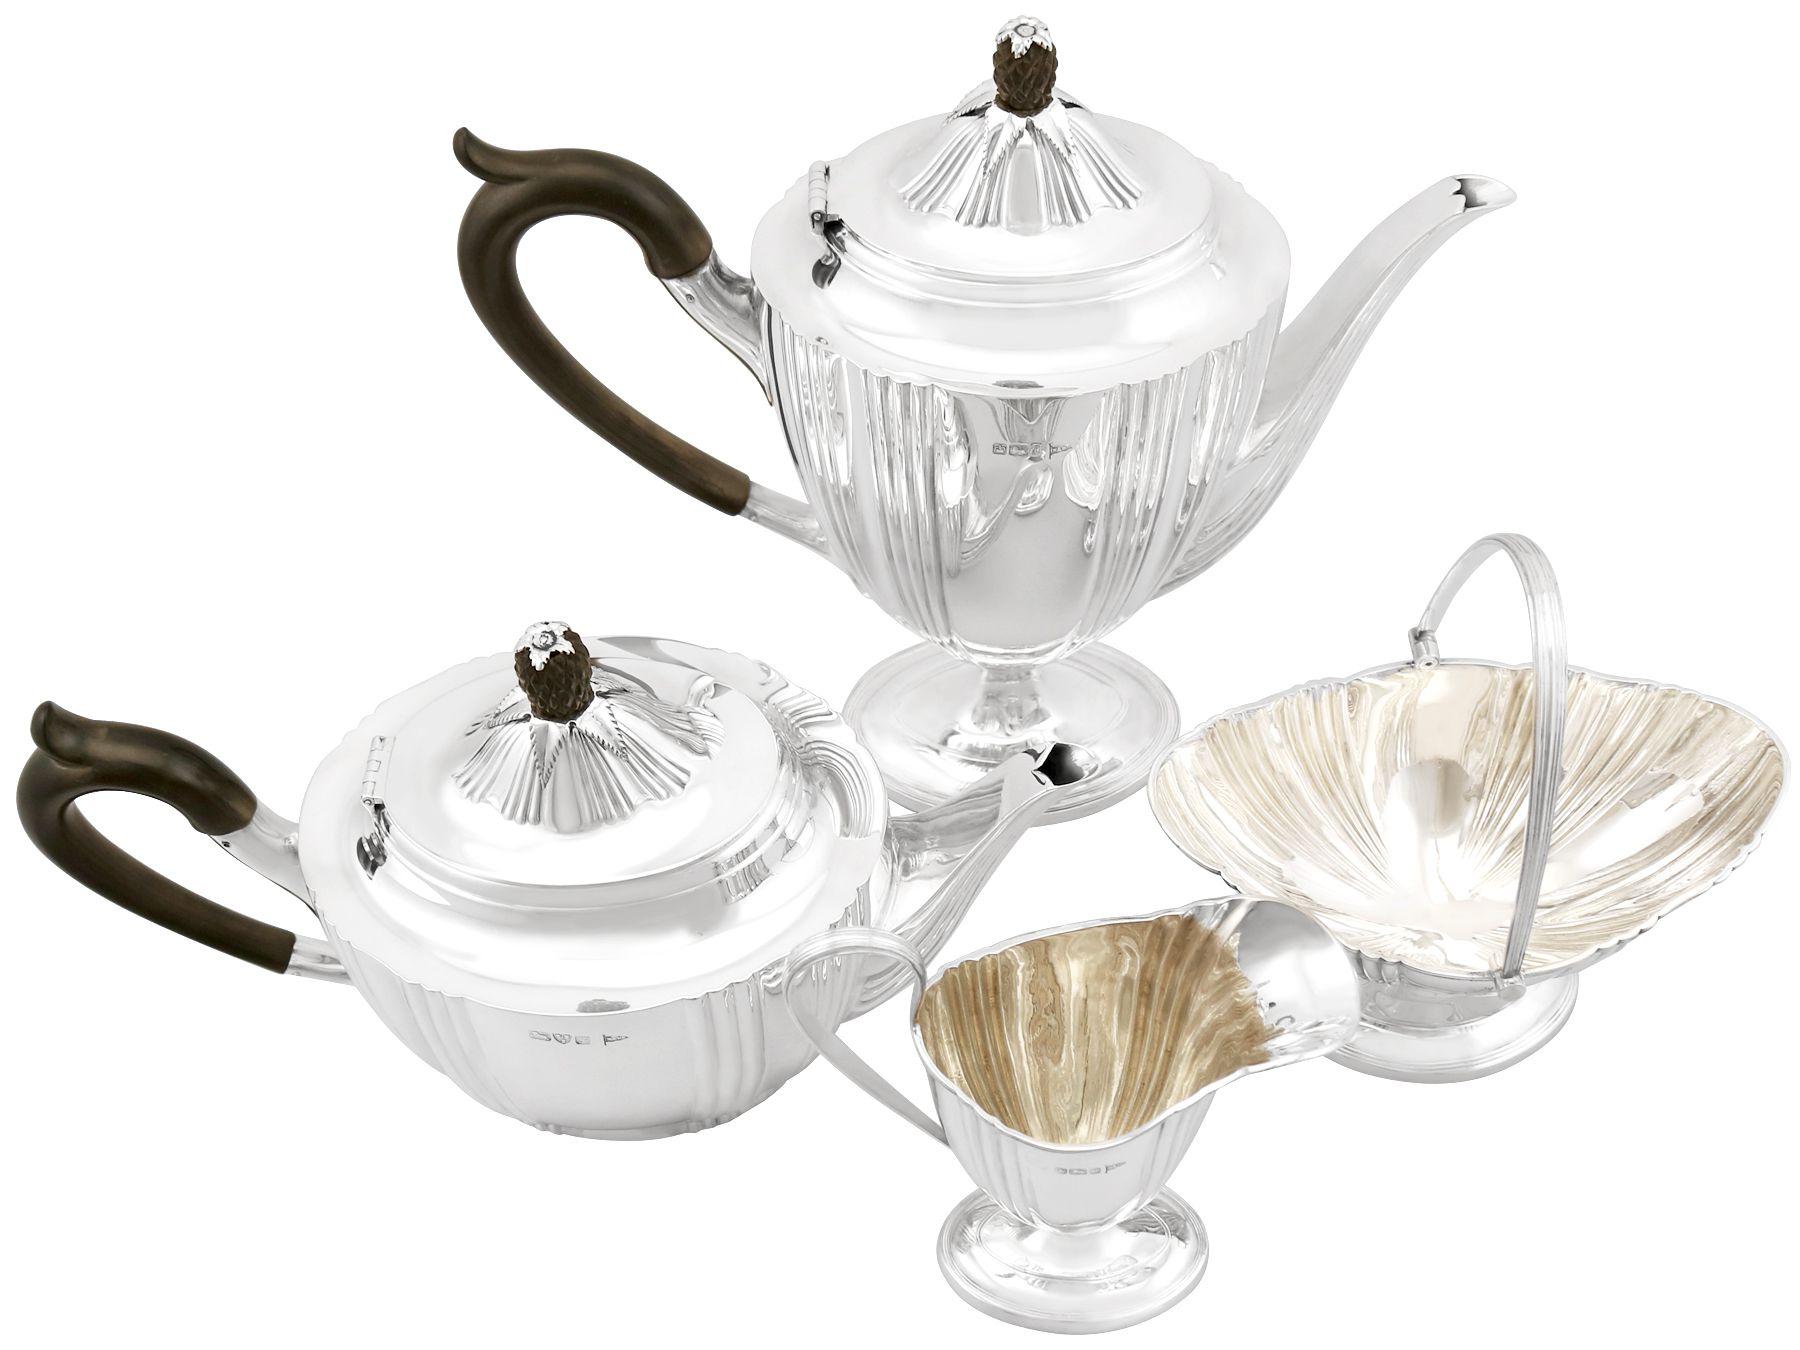 An exceptional, fine and impressive antique Edwardian English sterling silver four-piece tea and coffee service, an addition to our silver teaware collection

This exceptional, antique Edwardian four piece sterling silver tea and coffee service